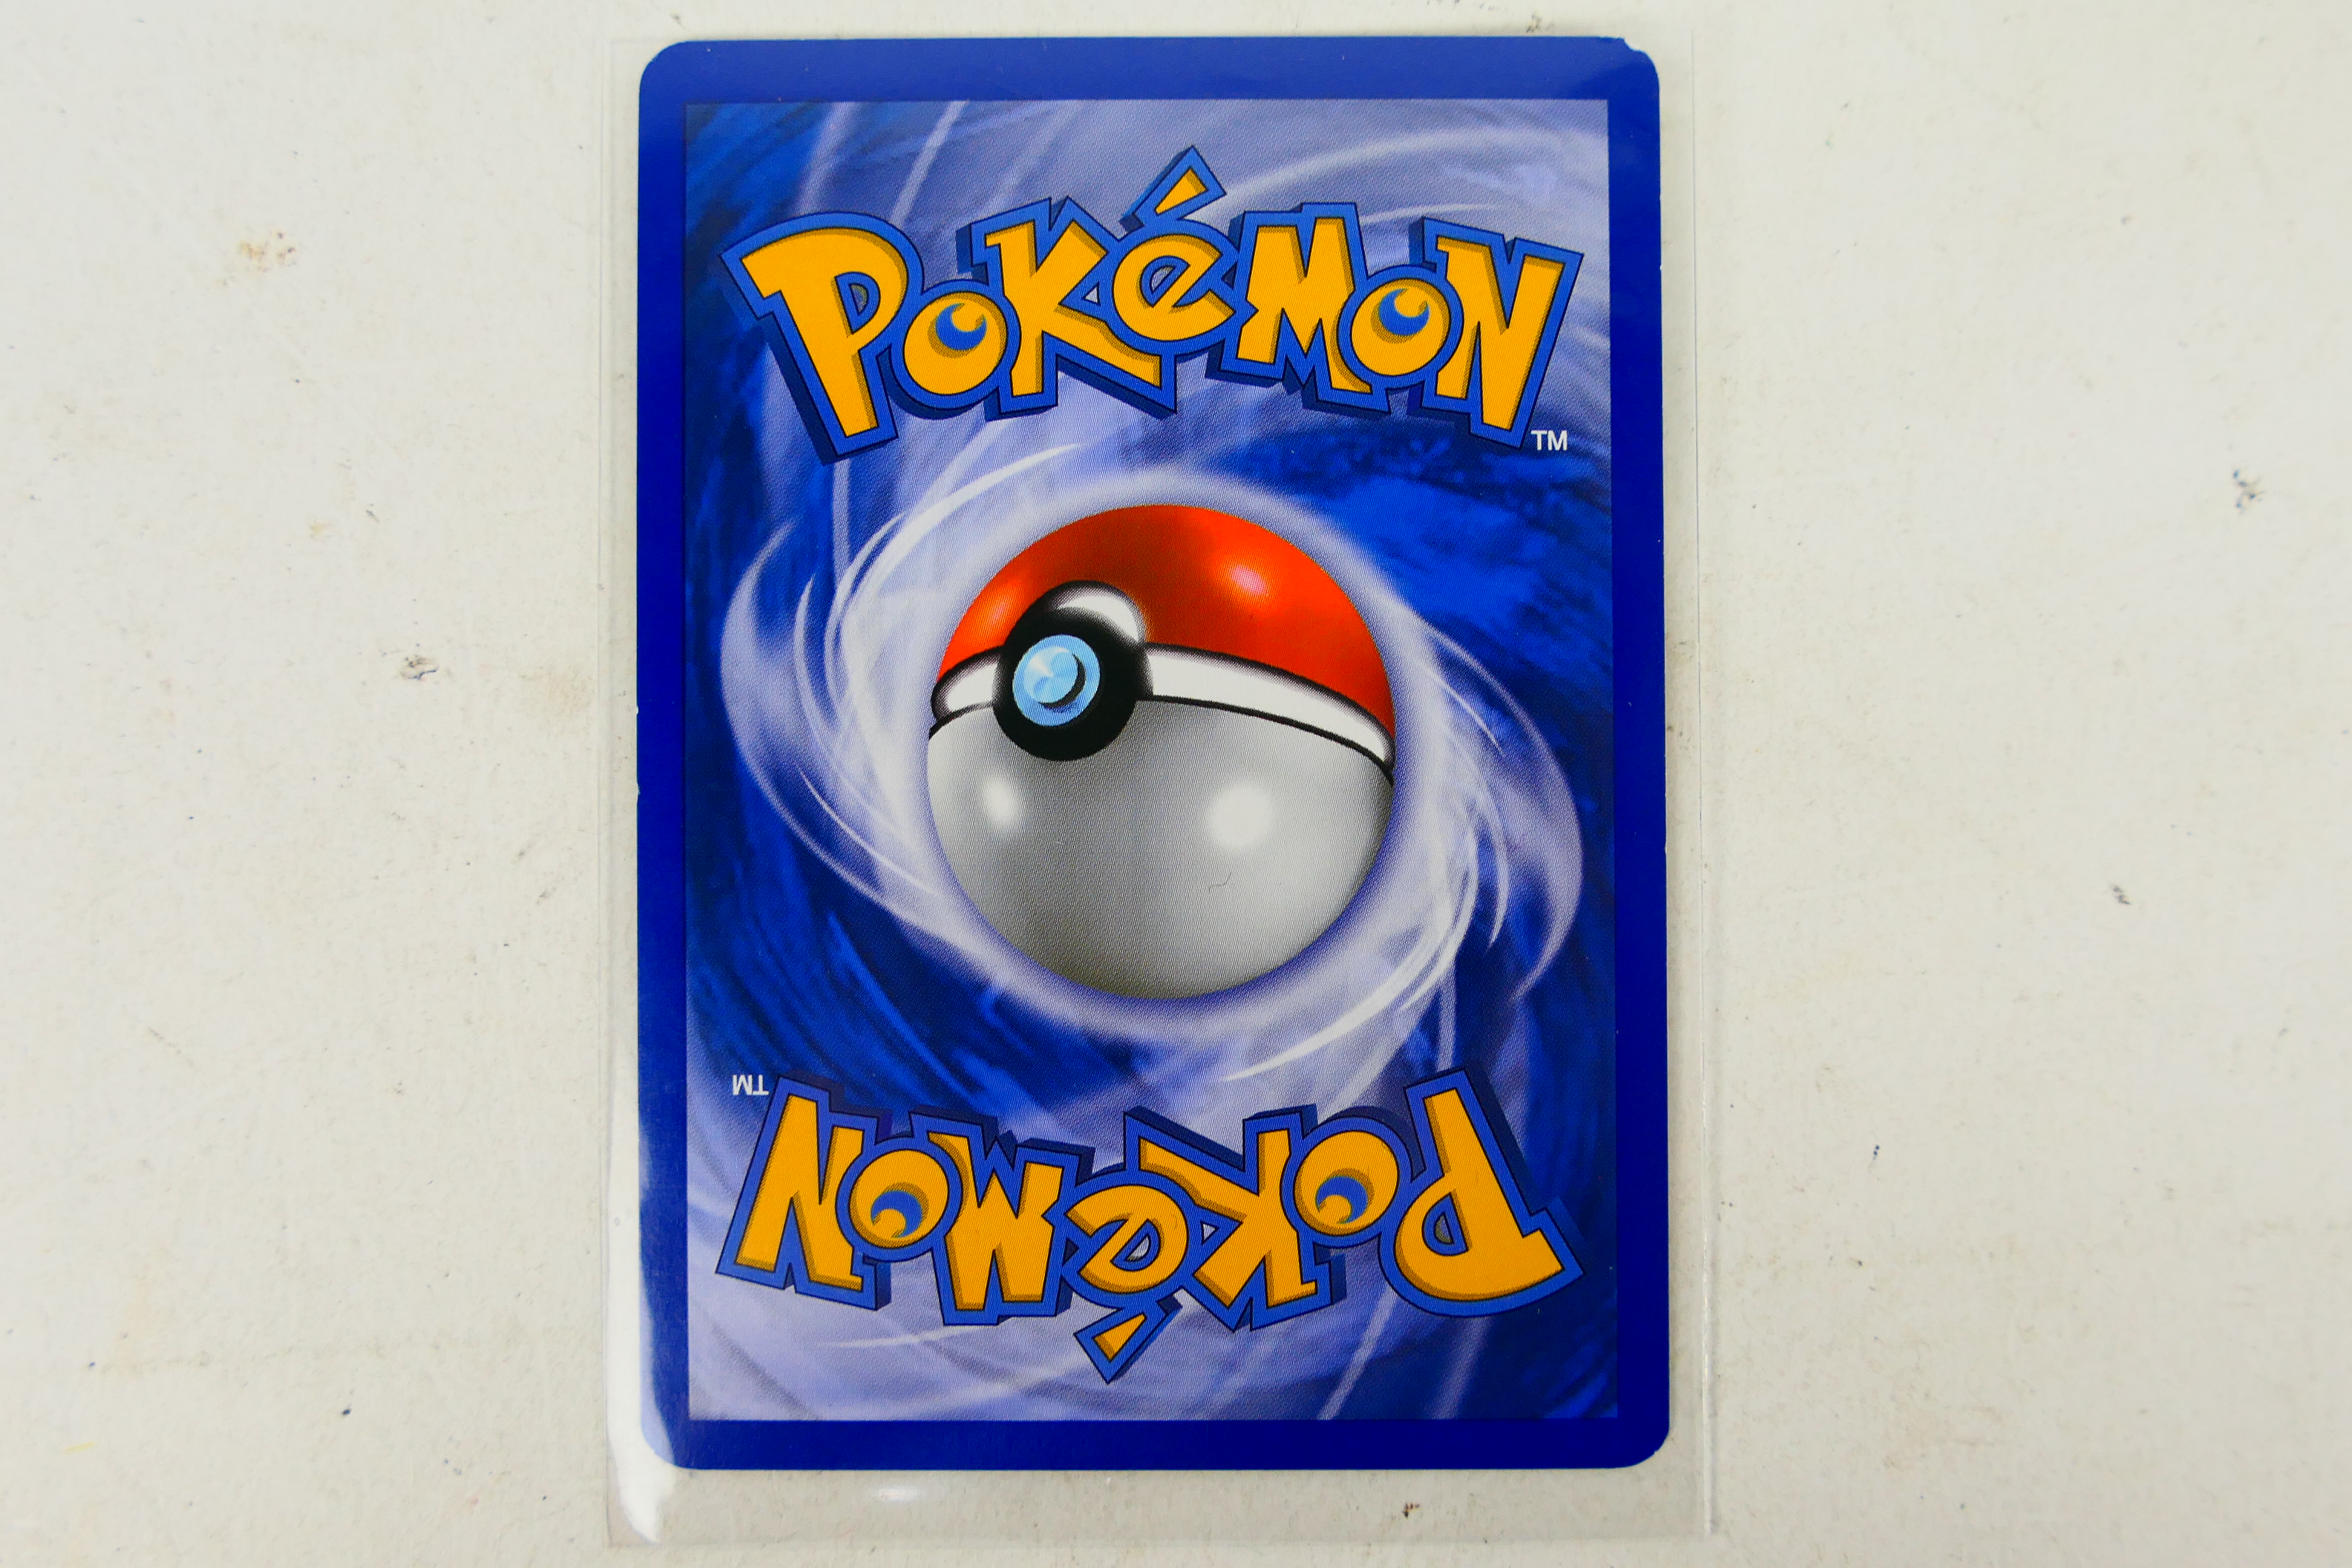 Pokemon - A Play! Pokemon Battle Road Victory Medal Trainer Card for 2010 / 2011, - Image 7 of 7